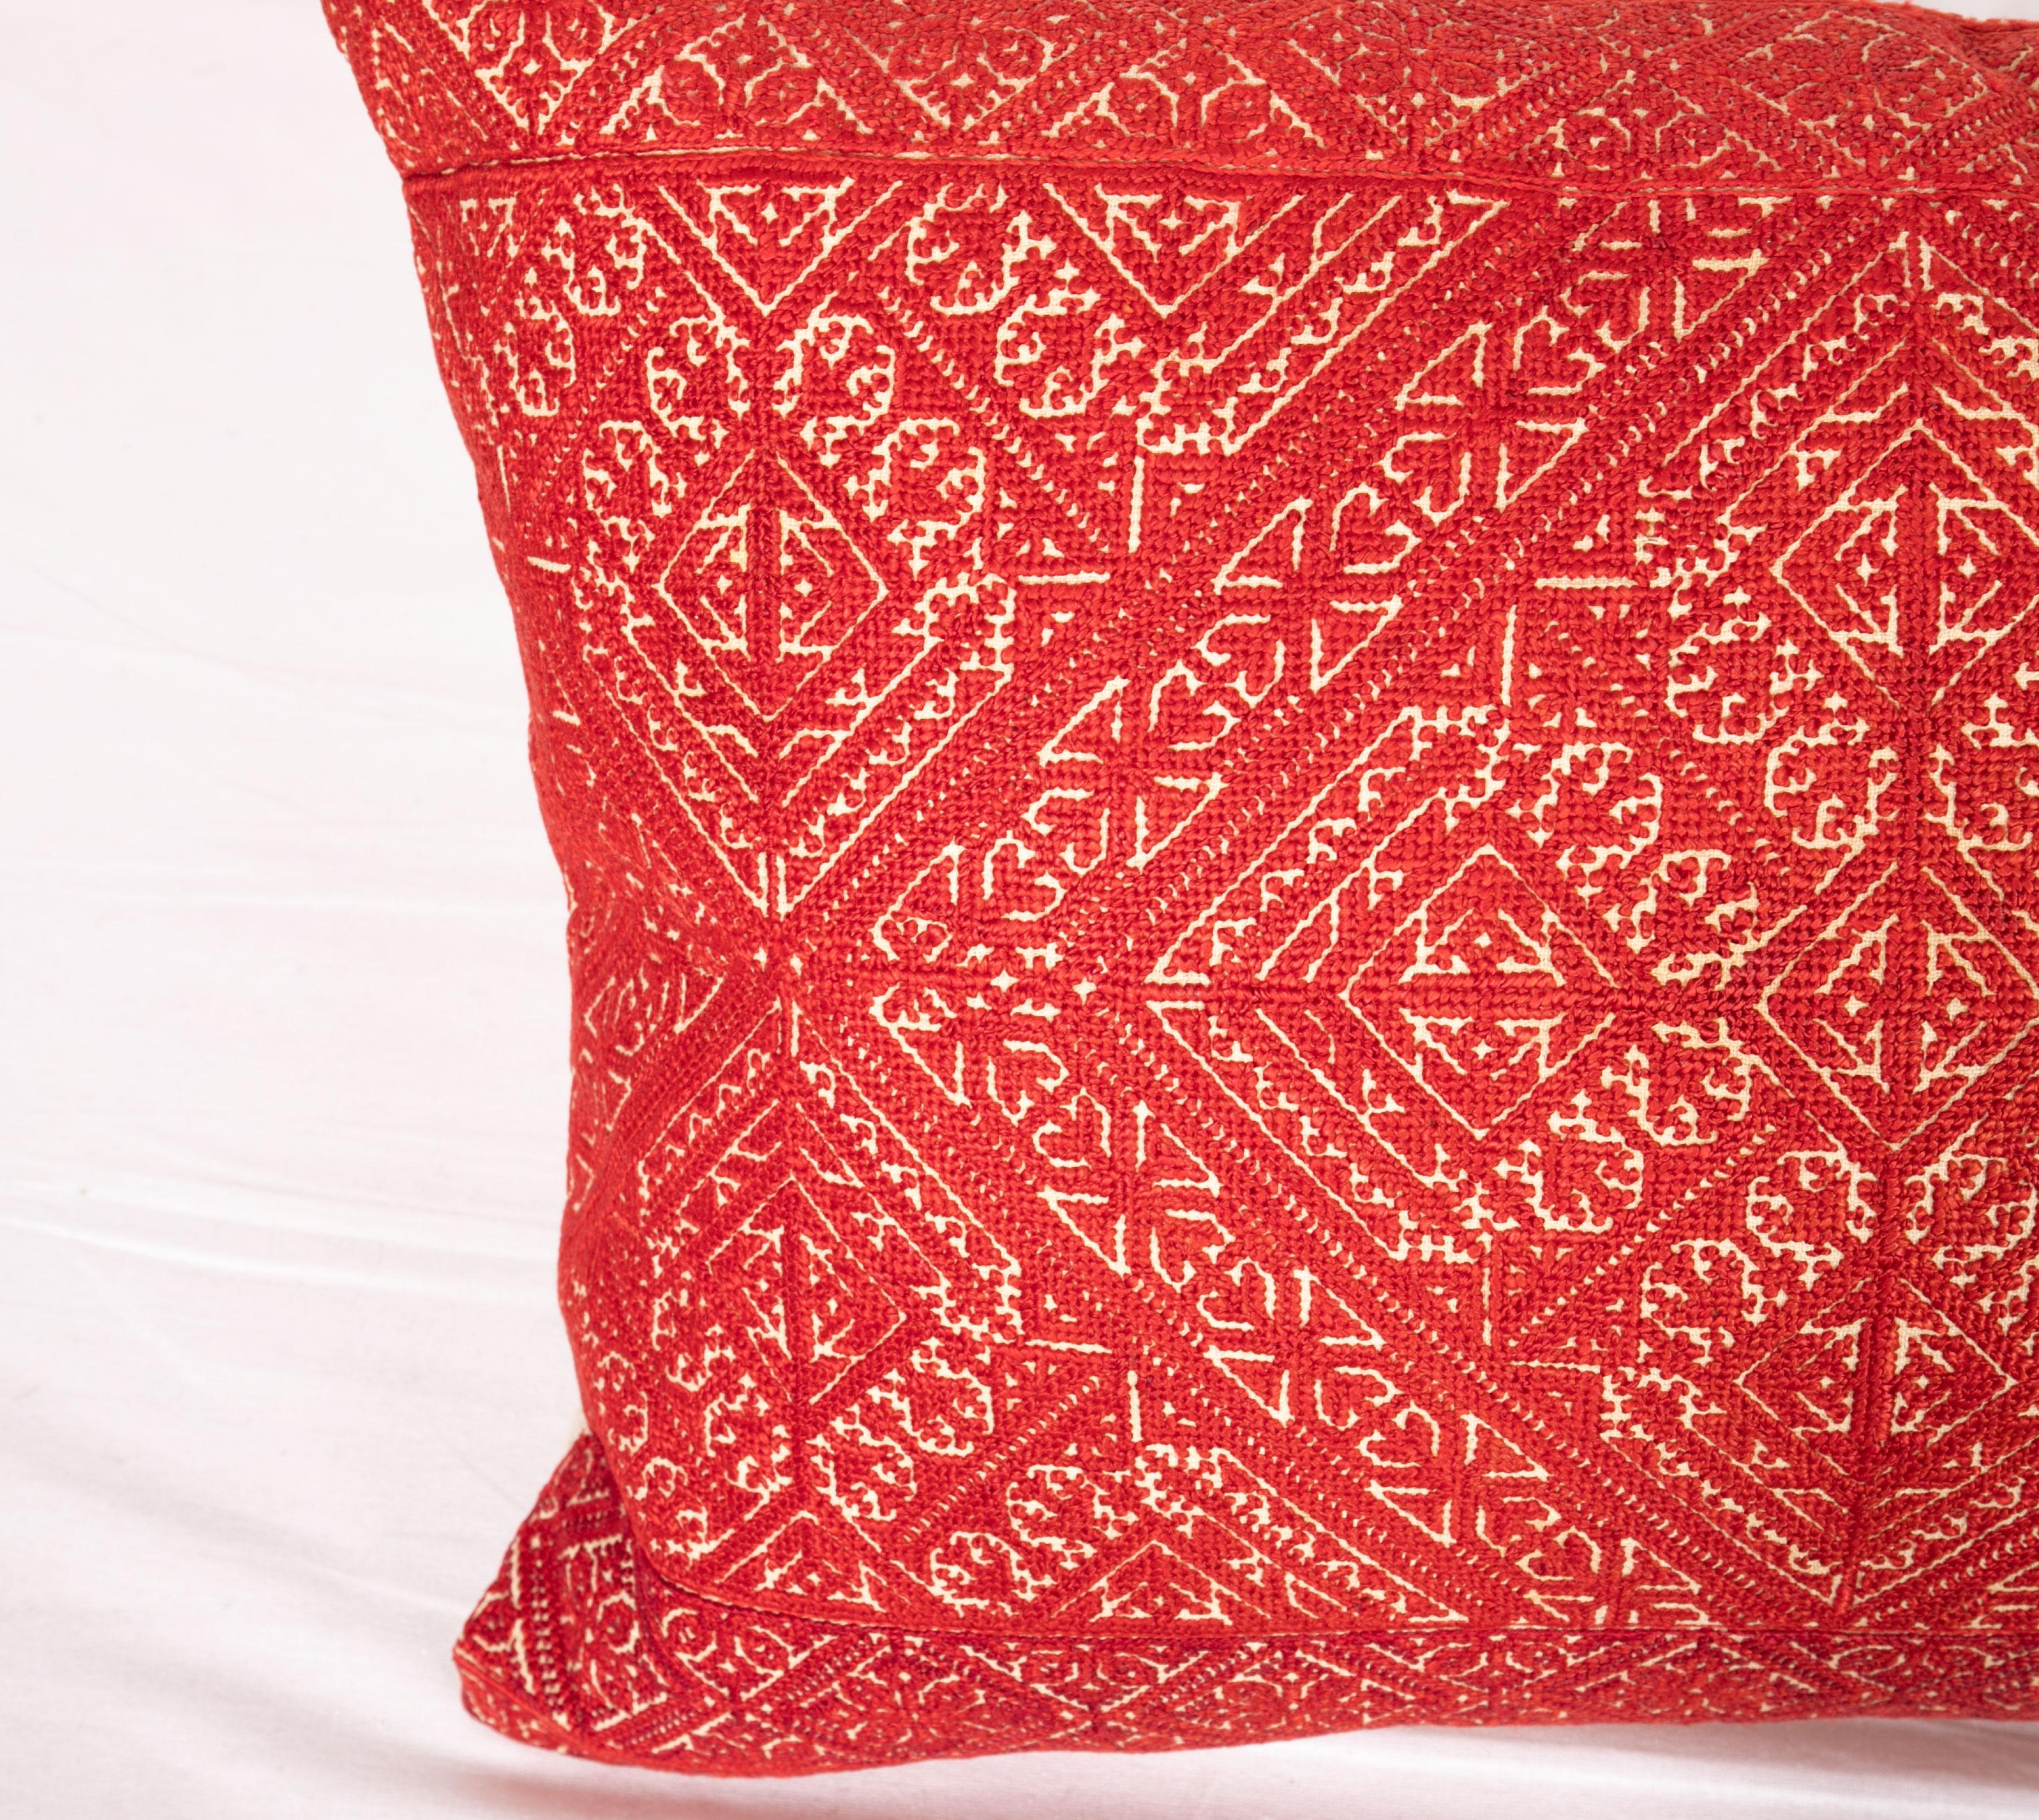 Embroidered Antique Moroccan Fez Embroidery Pillow Case, Early 20th Century